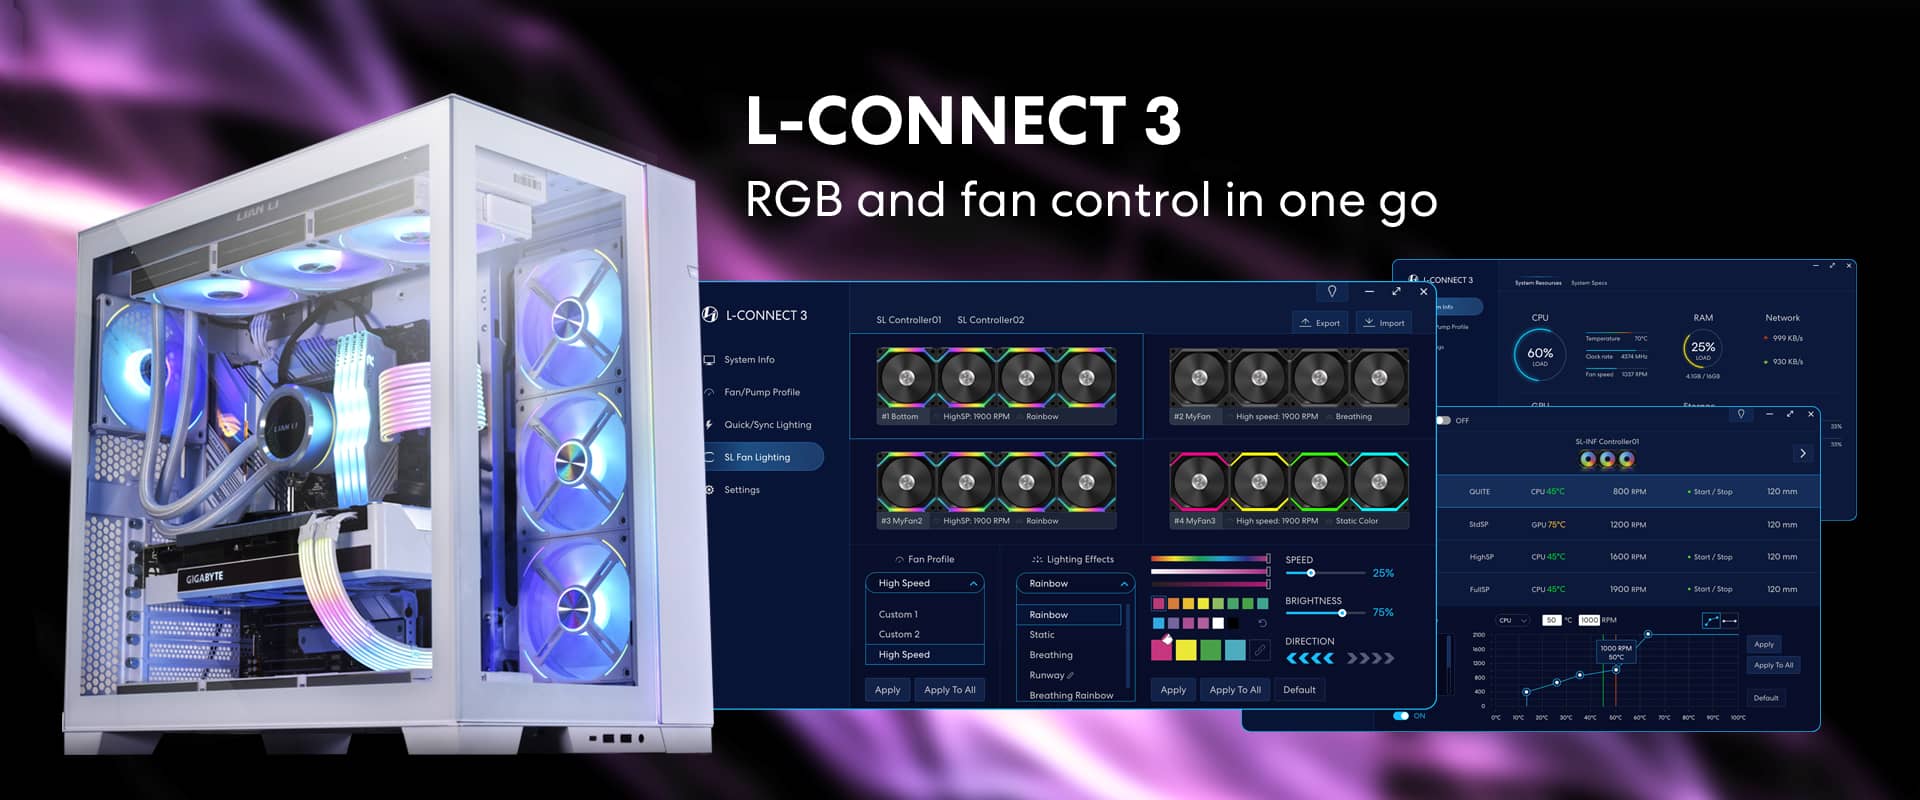 L-Connect3 RGB and fan control in one go